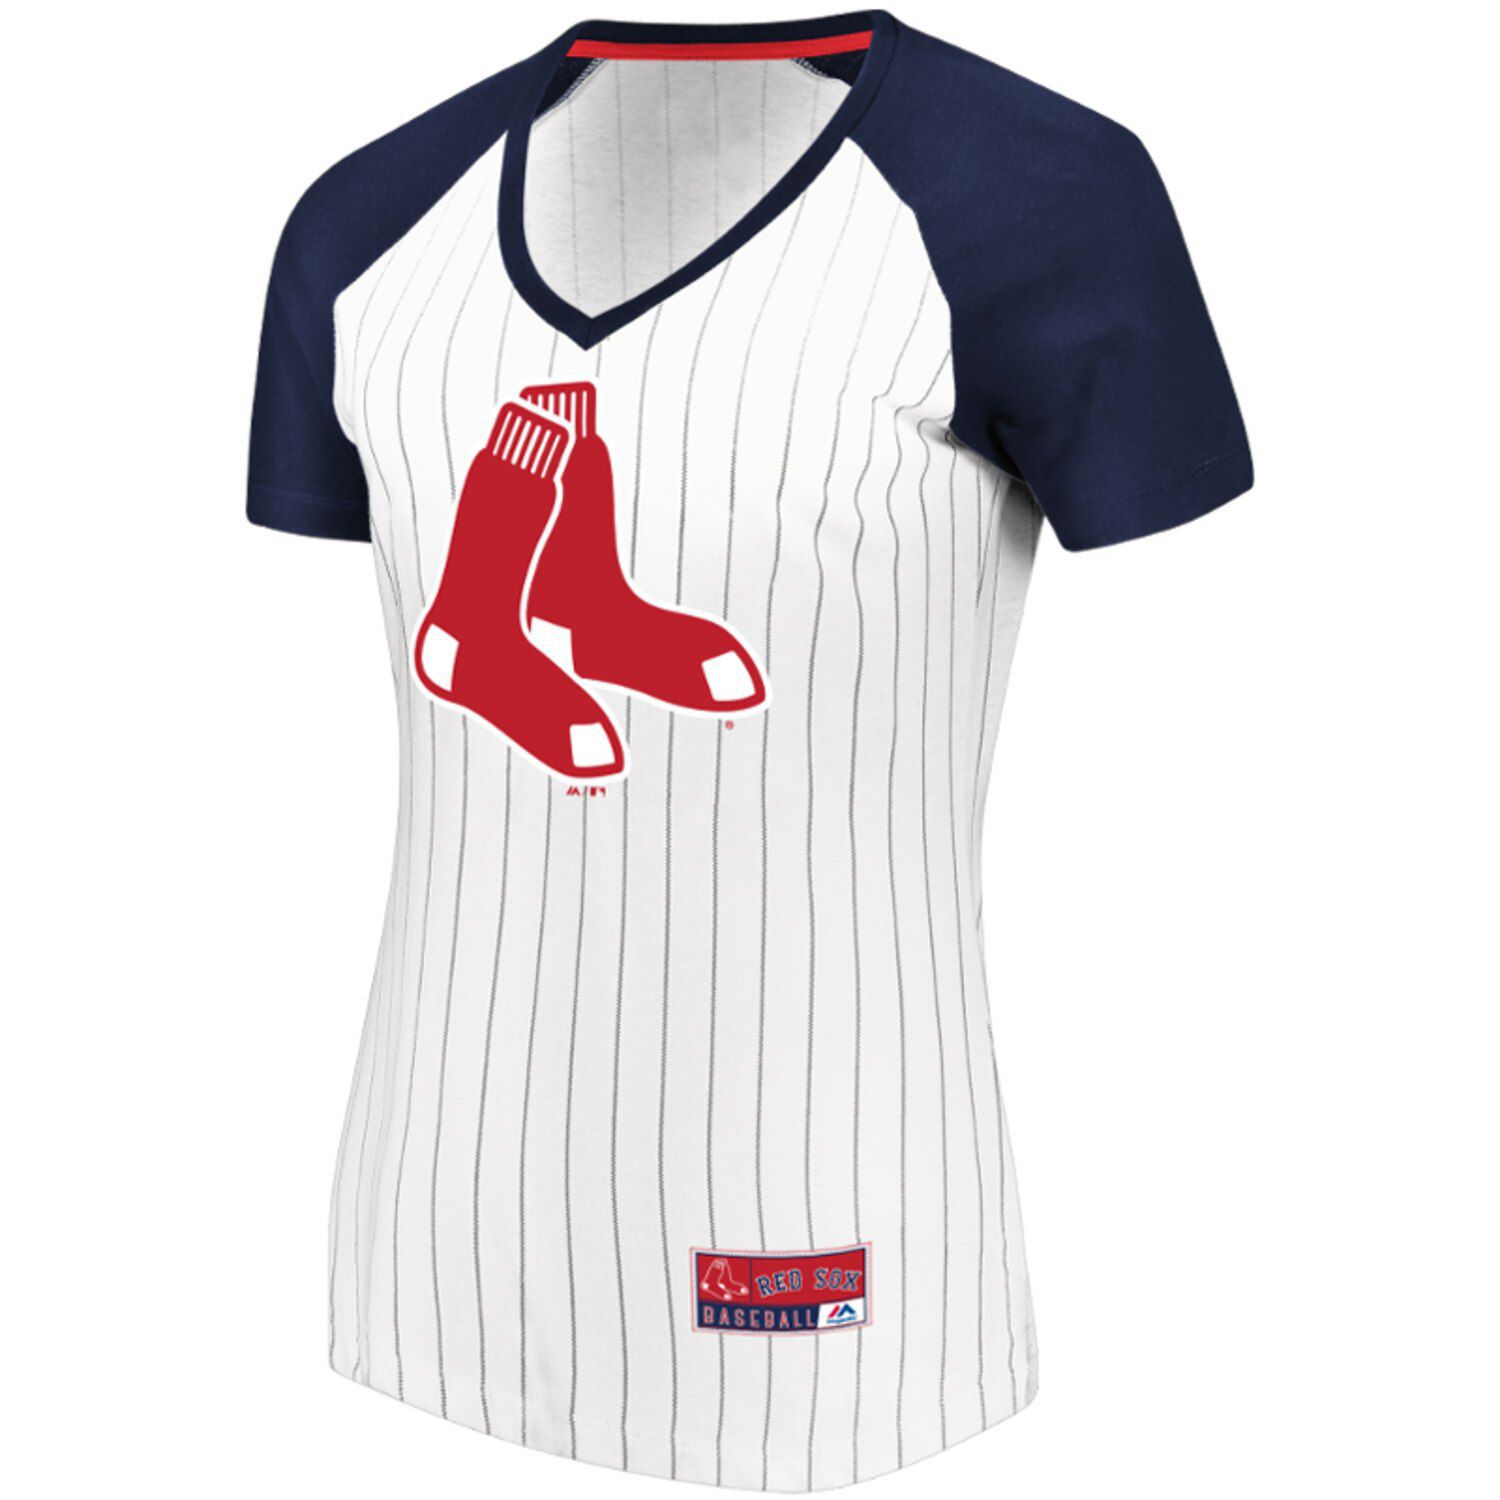 boston red sox baby jersey